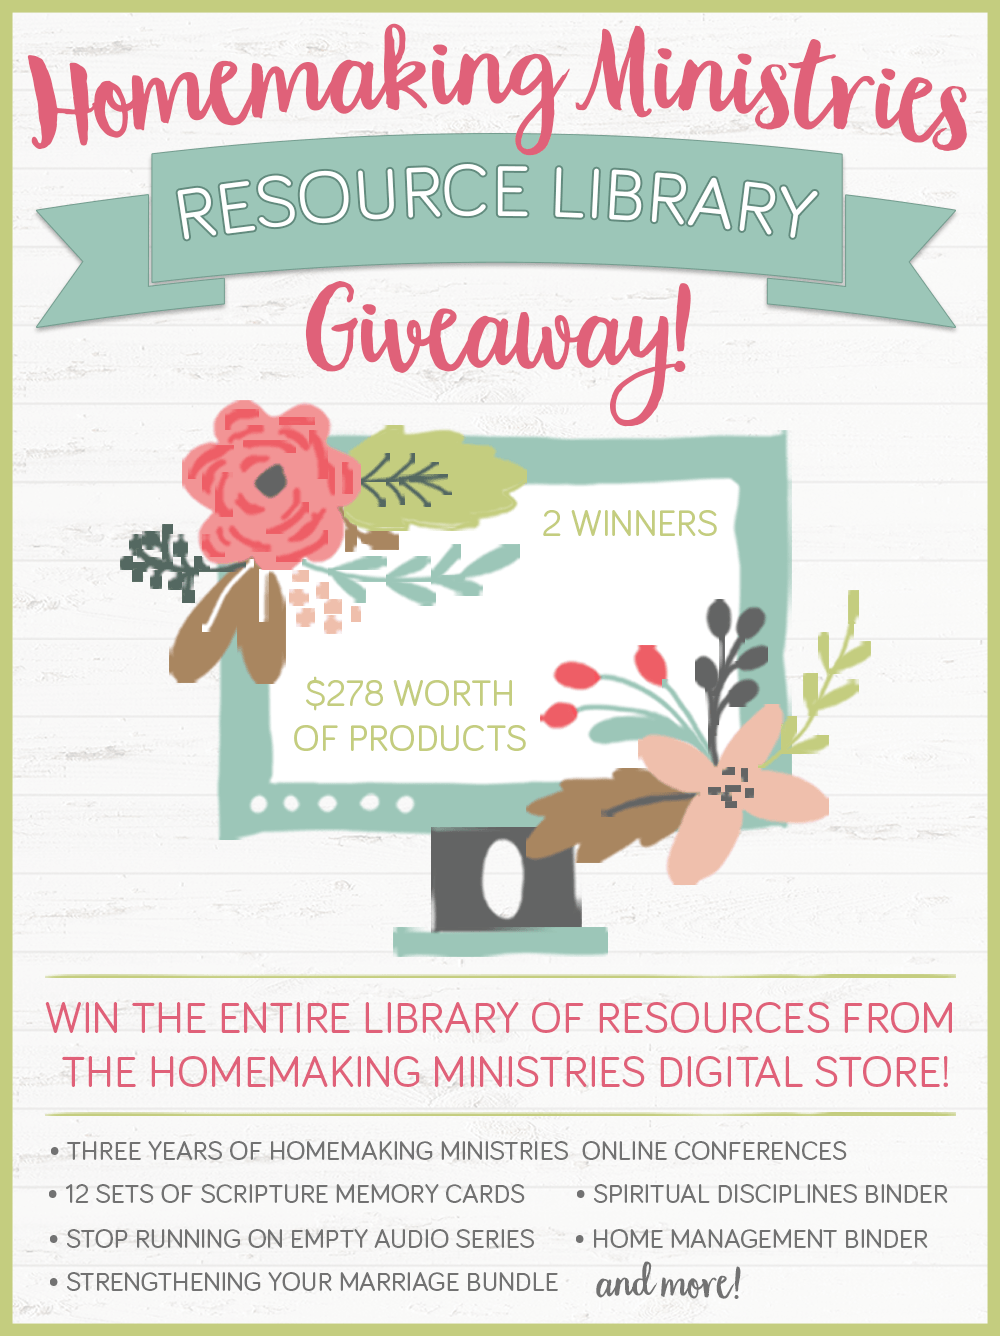 Enter to win all these amazing Homemaking Resources, giveaway ends 7/10